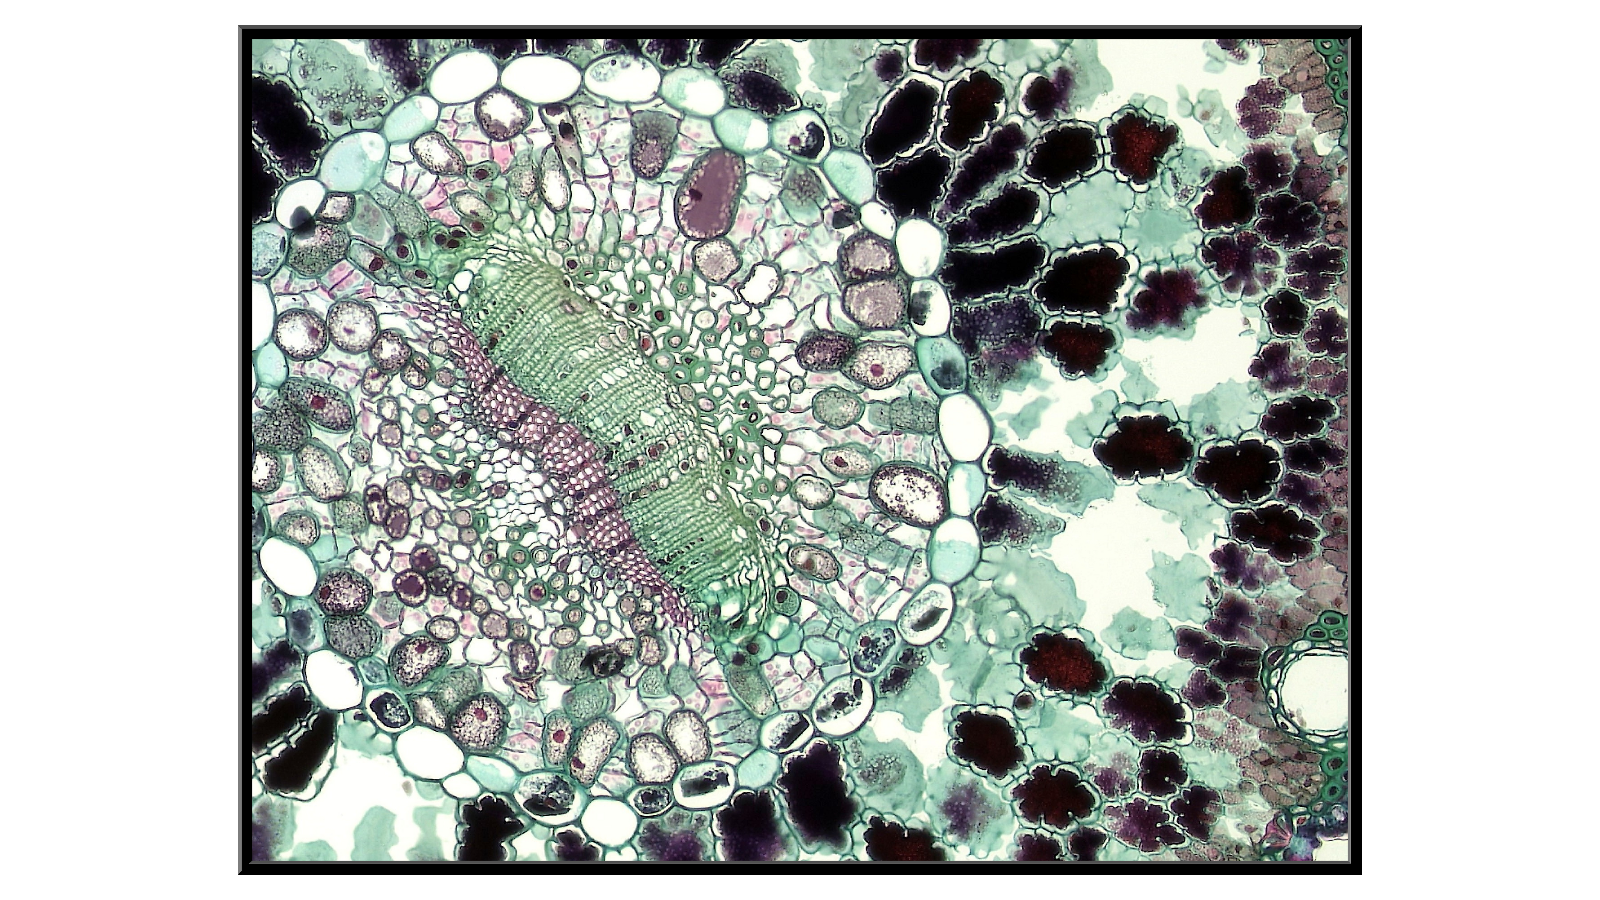 Cross-section through a pine needle - 2